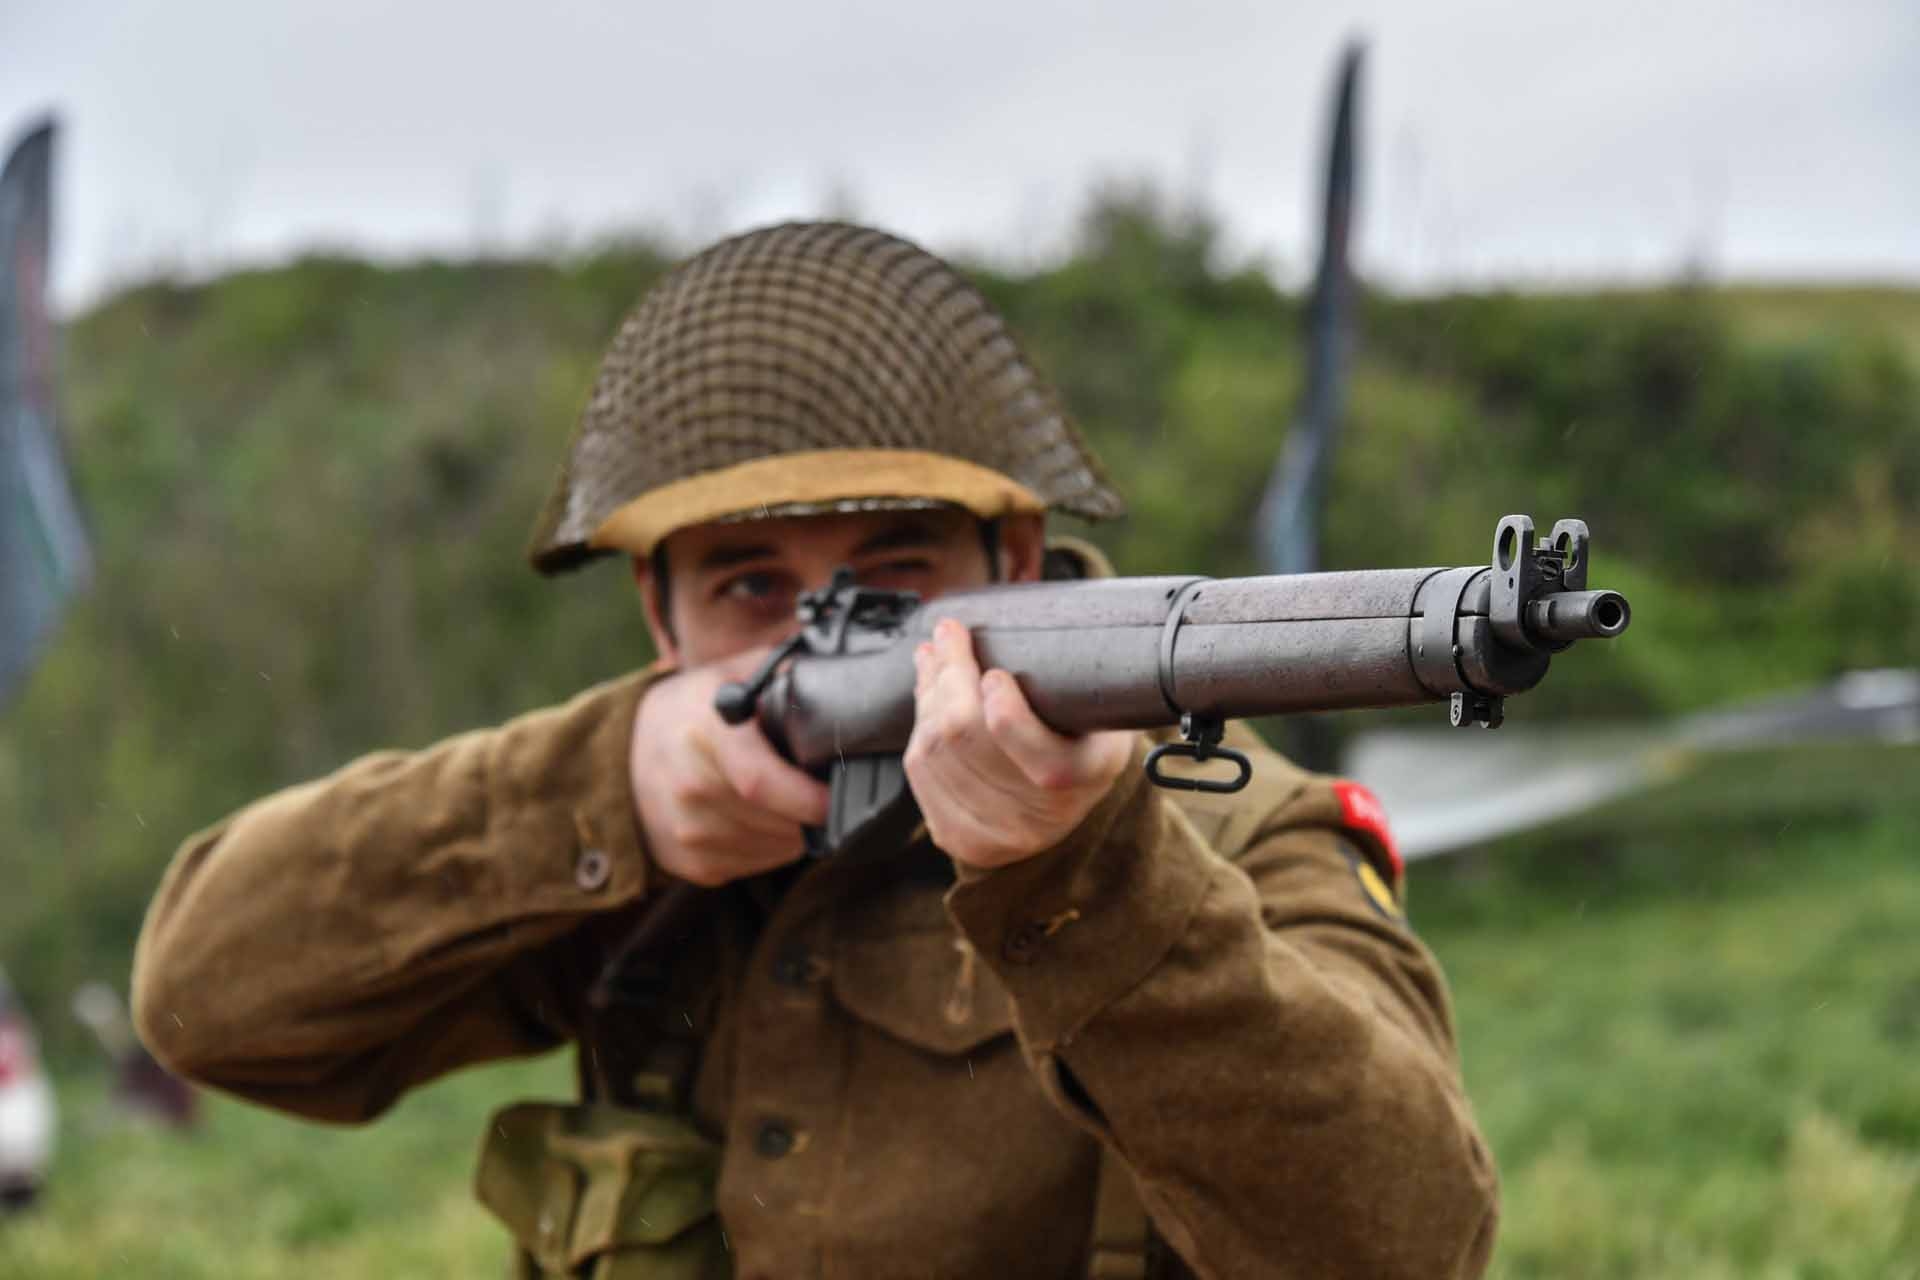 The Lee-Enfield , the “utilitarian” rifle | all4shooters